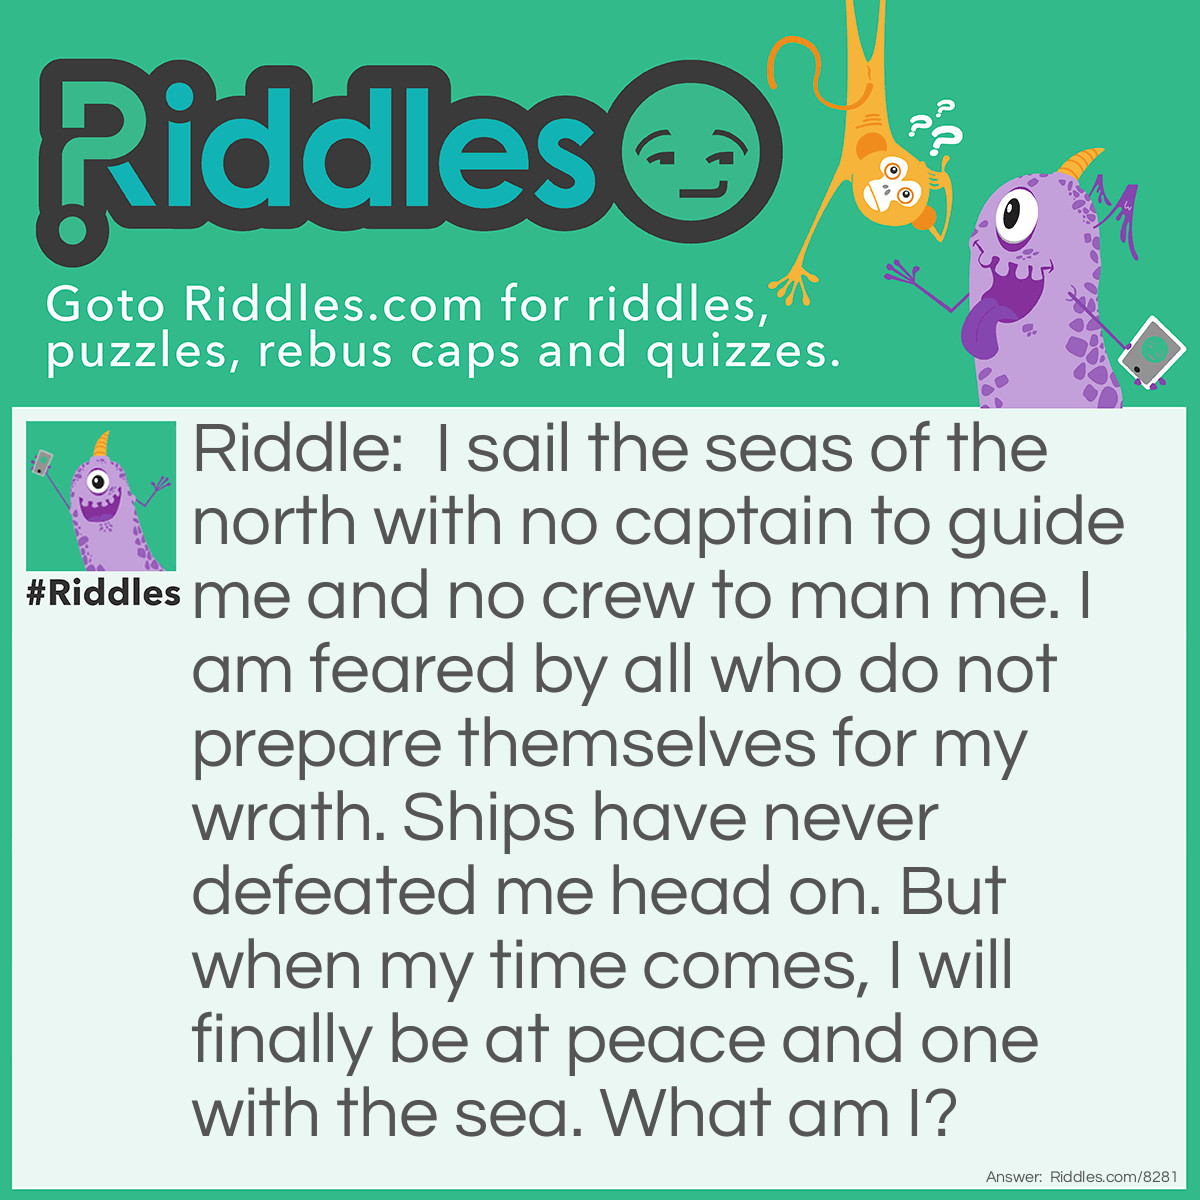 Riddle: I sail the seas of the north with no captain to guide me and no crew to man me. I am feared by all who do not prepare themselves for my wrath. Ships have never defeated me head on. But when my time comes, I will finally be at peace and one with the sea. What am I? Answer: An Iceberg.